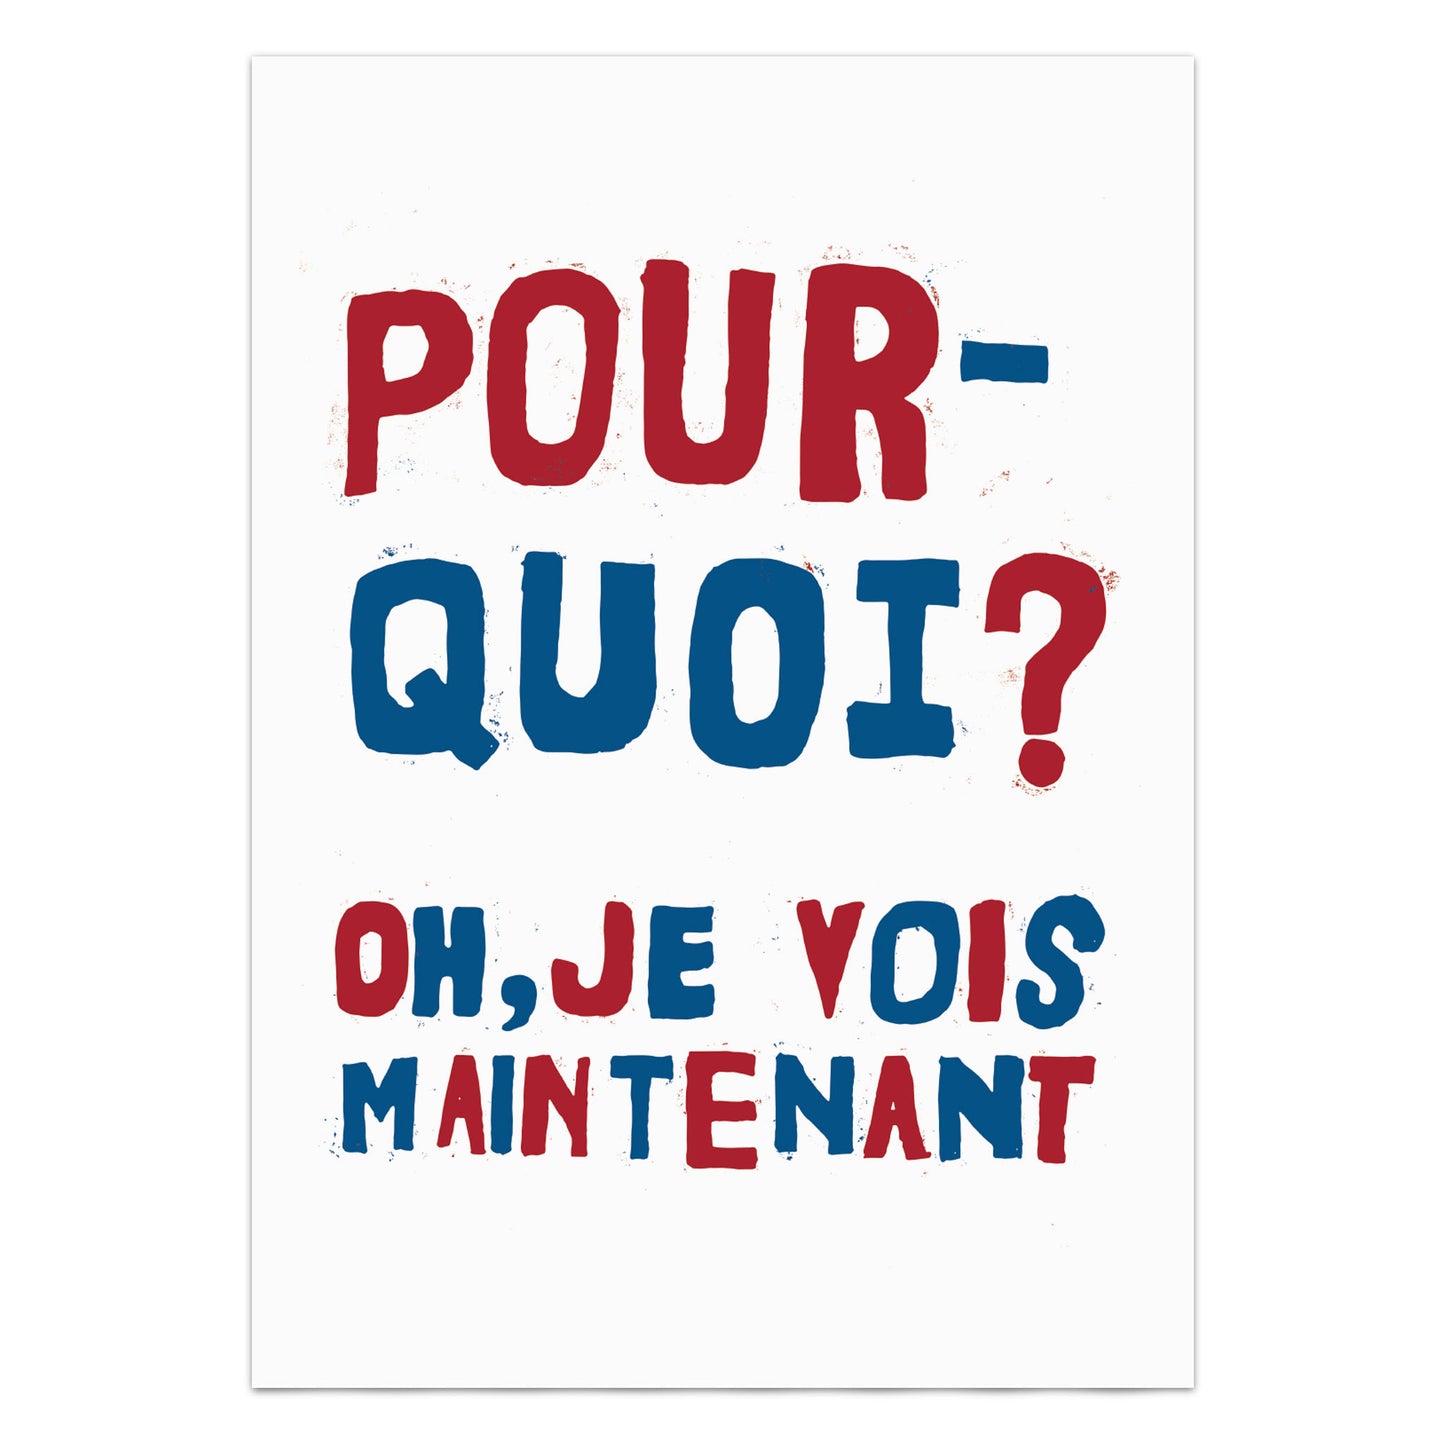 Pourquoi? Why? Protest Poster